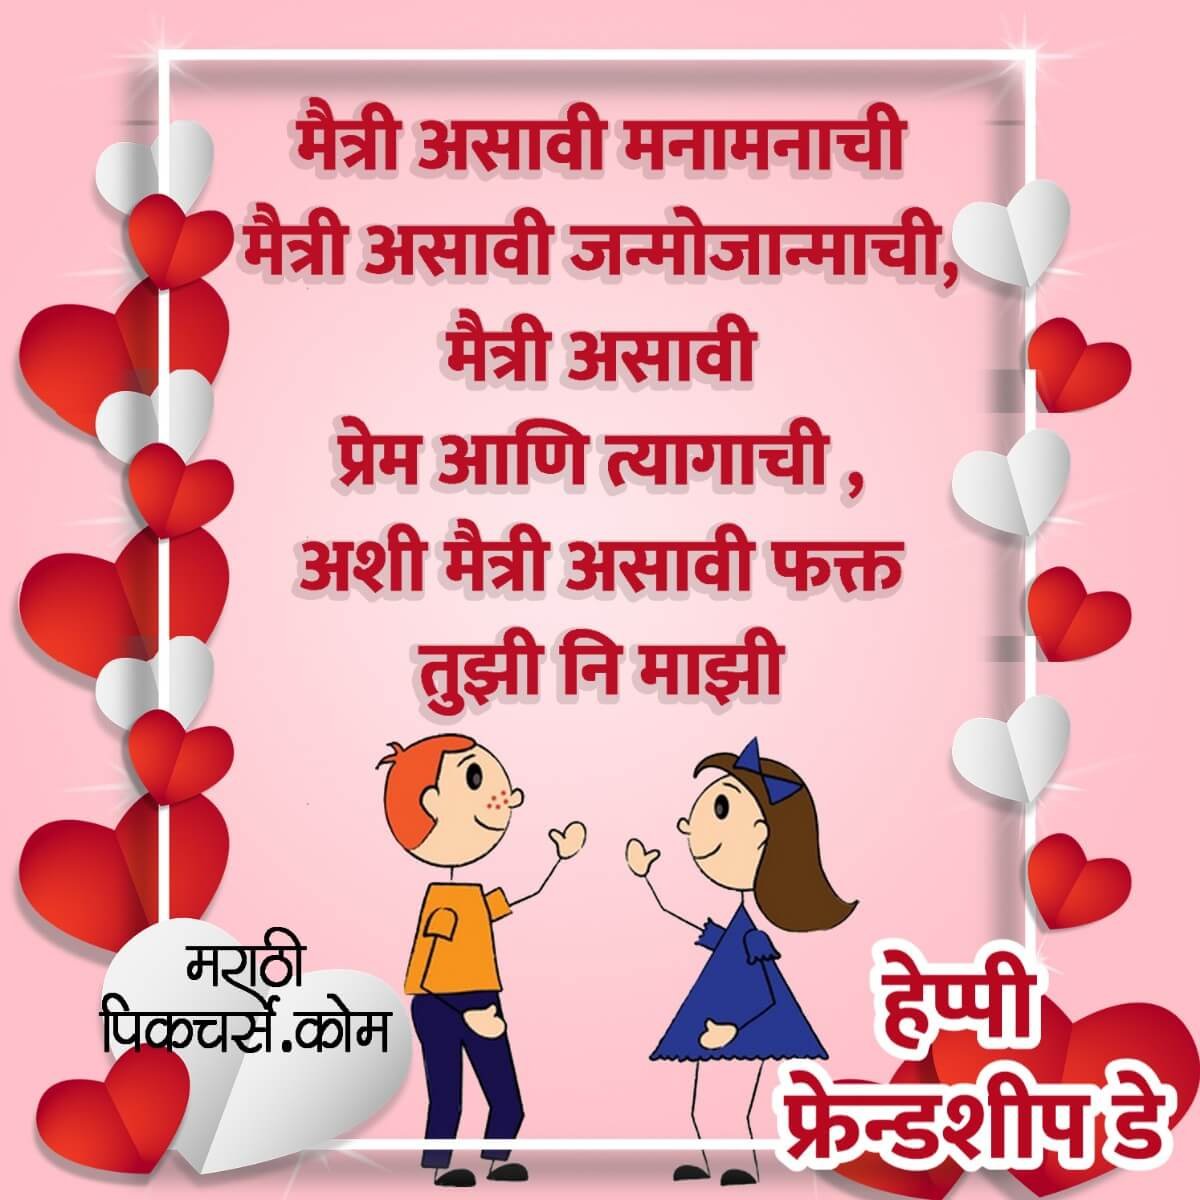 Happy Friendship Day For Friend